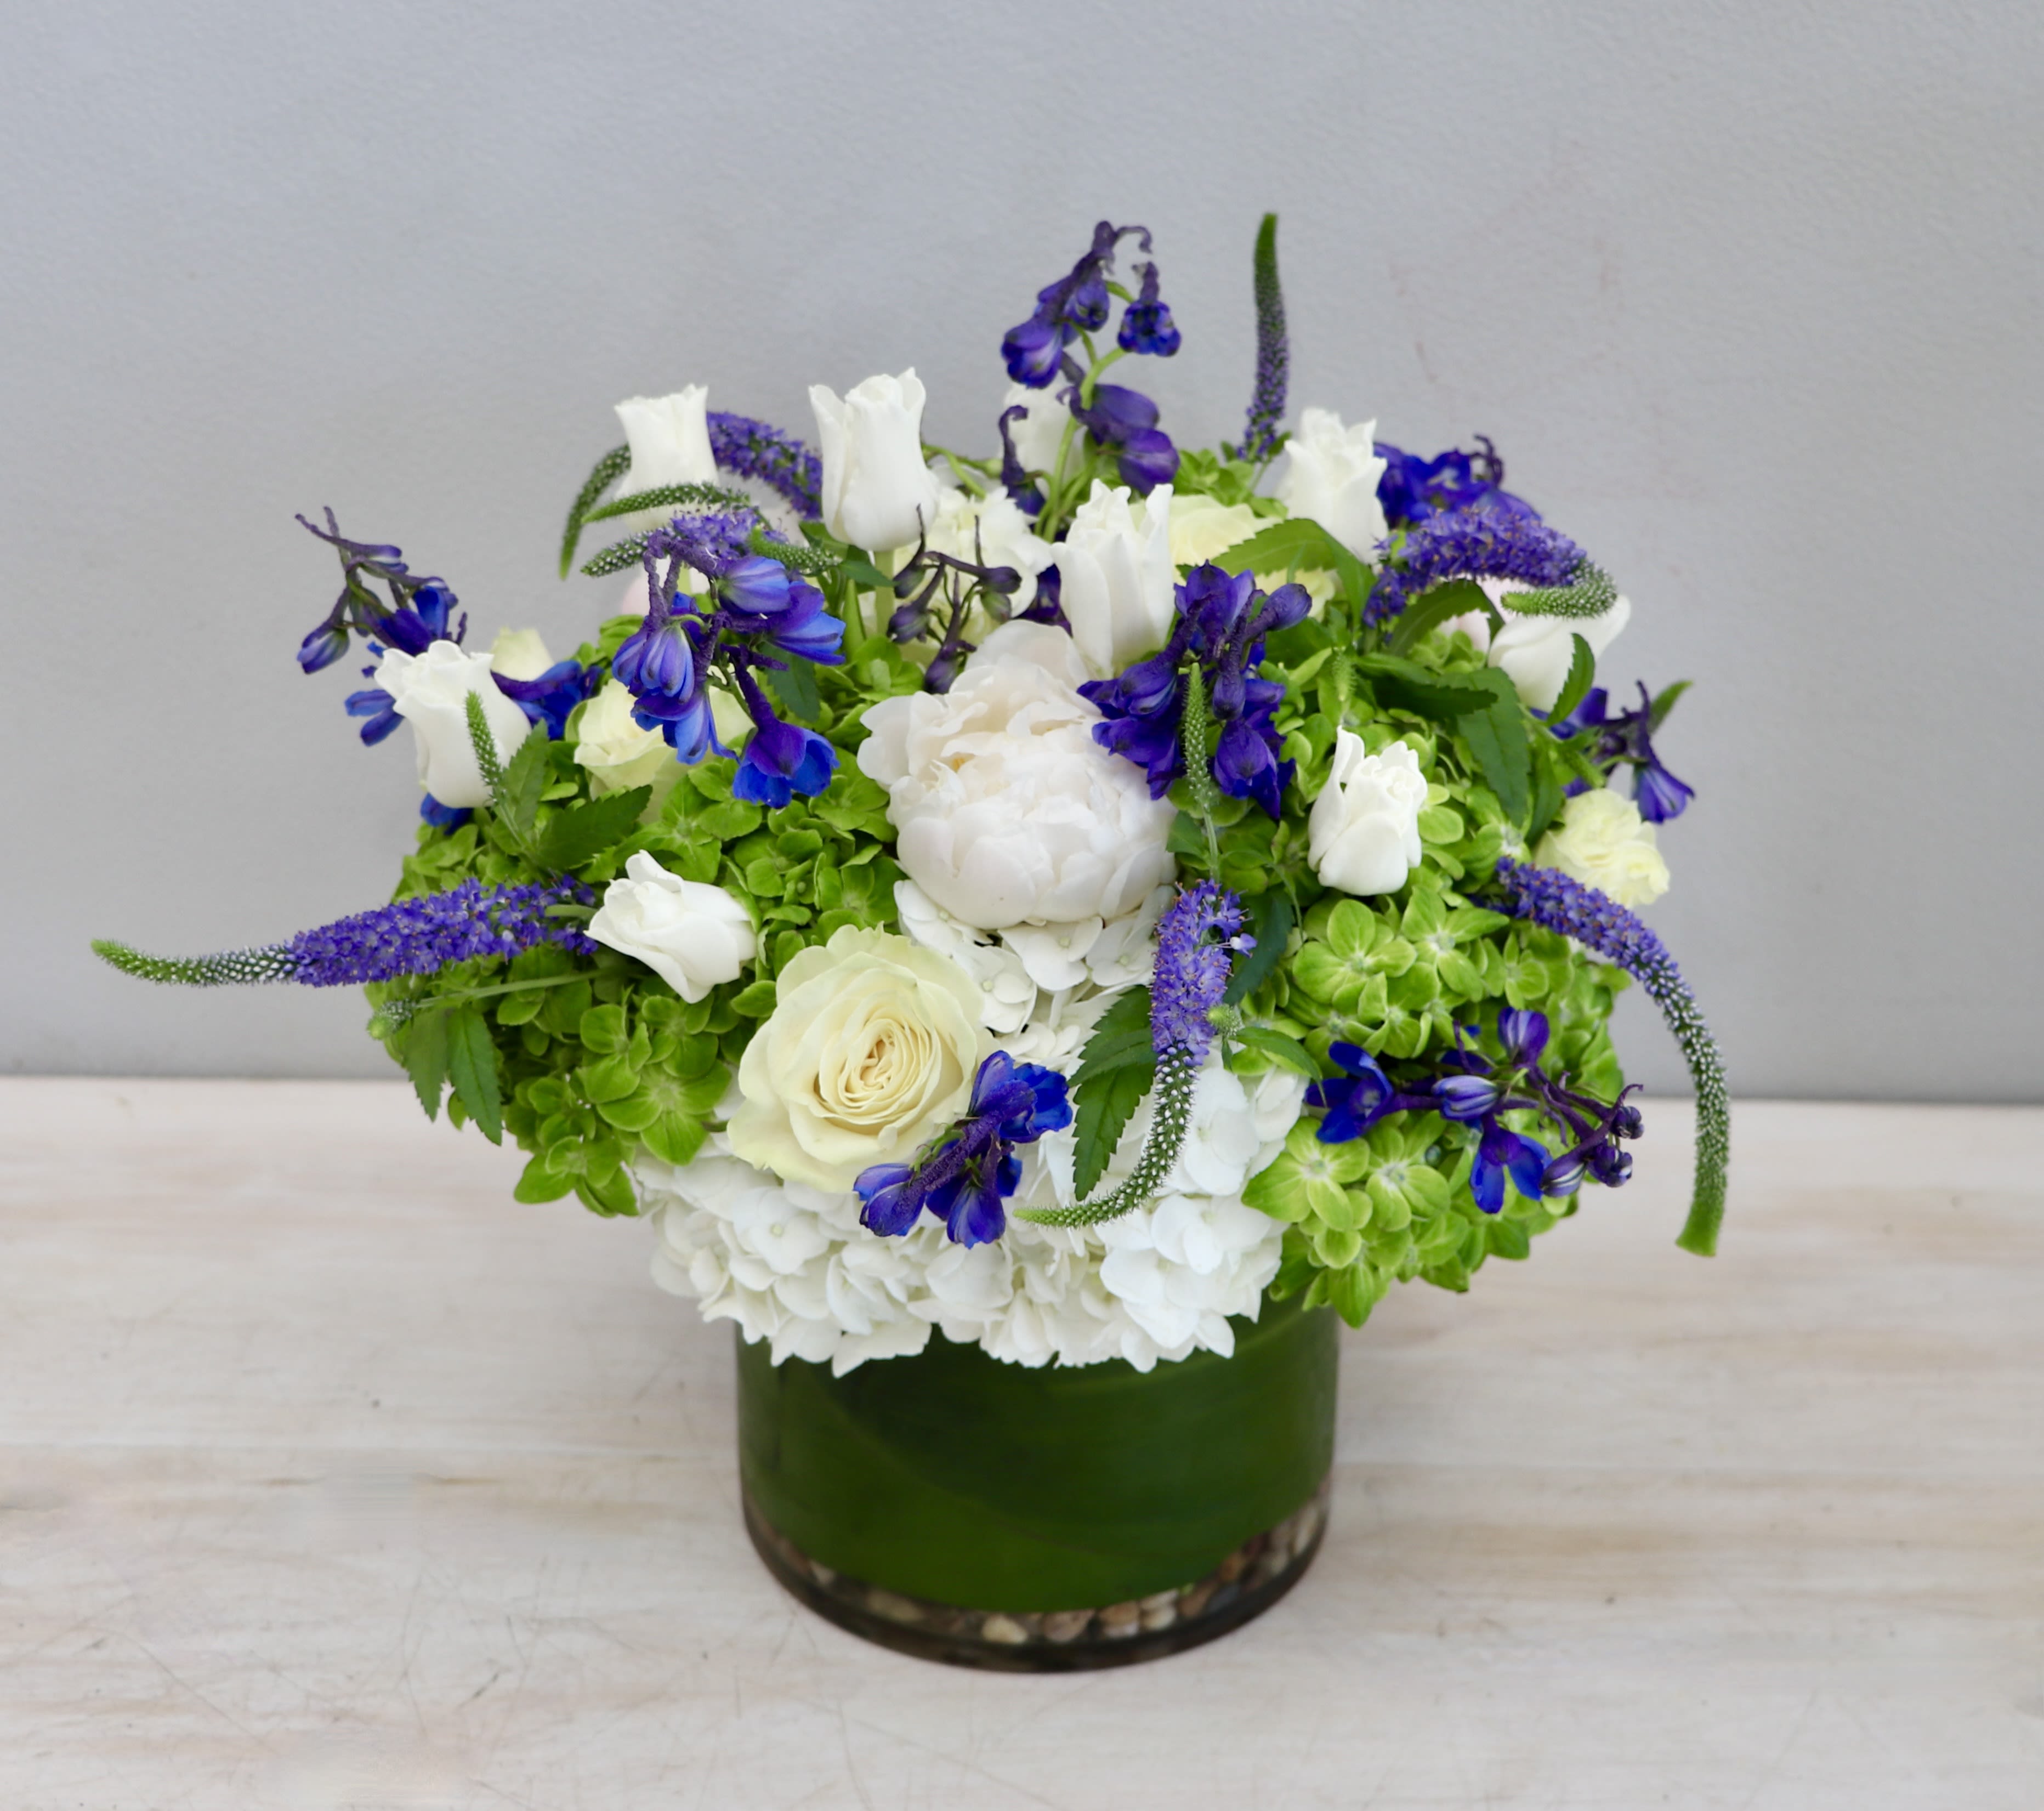 Seasonal Hydrangeas and Company - Glendale Florist - This arrangement features seasonal hydrangeas along with white and blue flowers.  